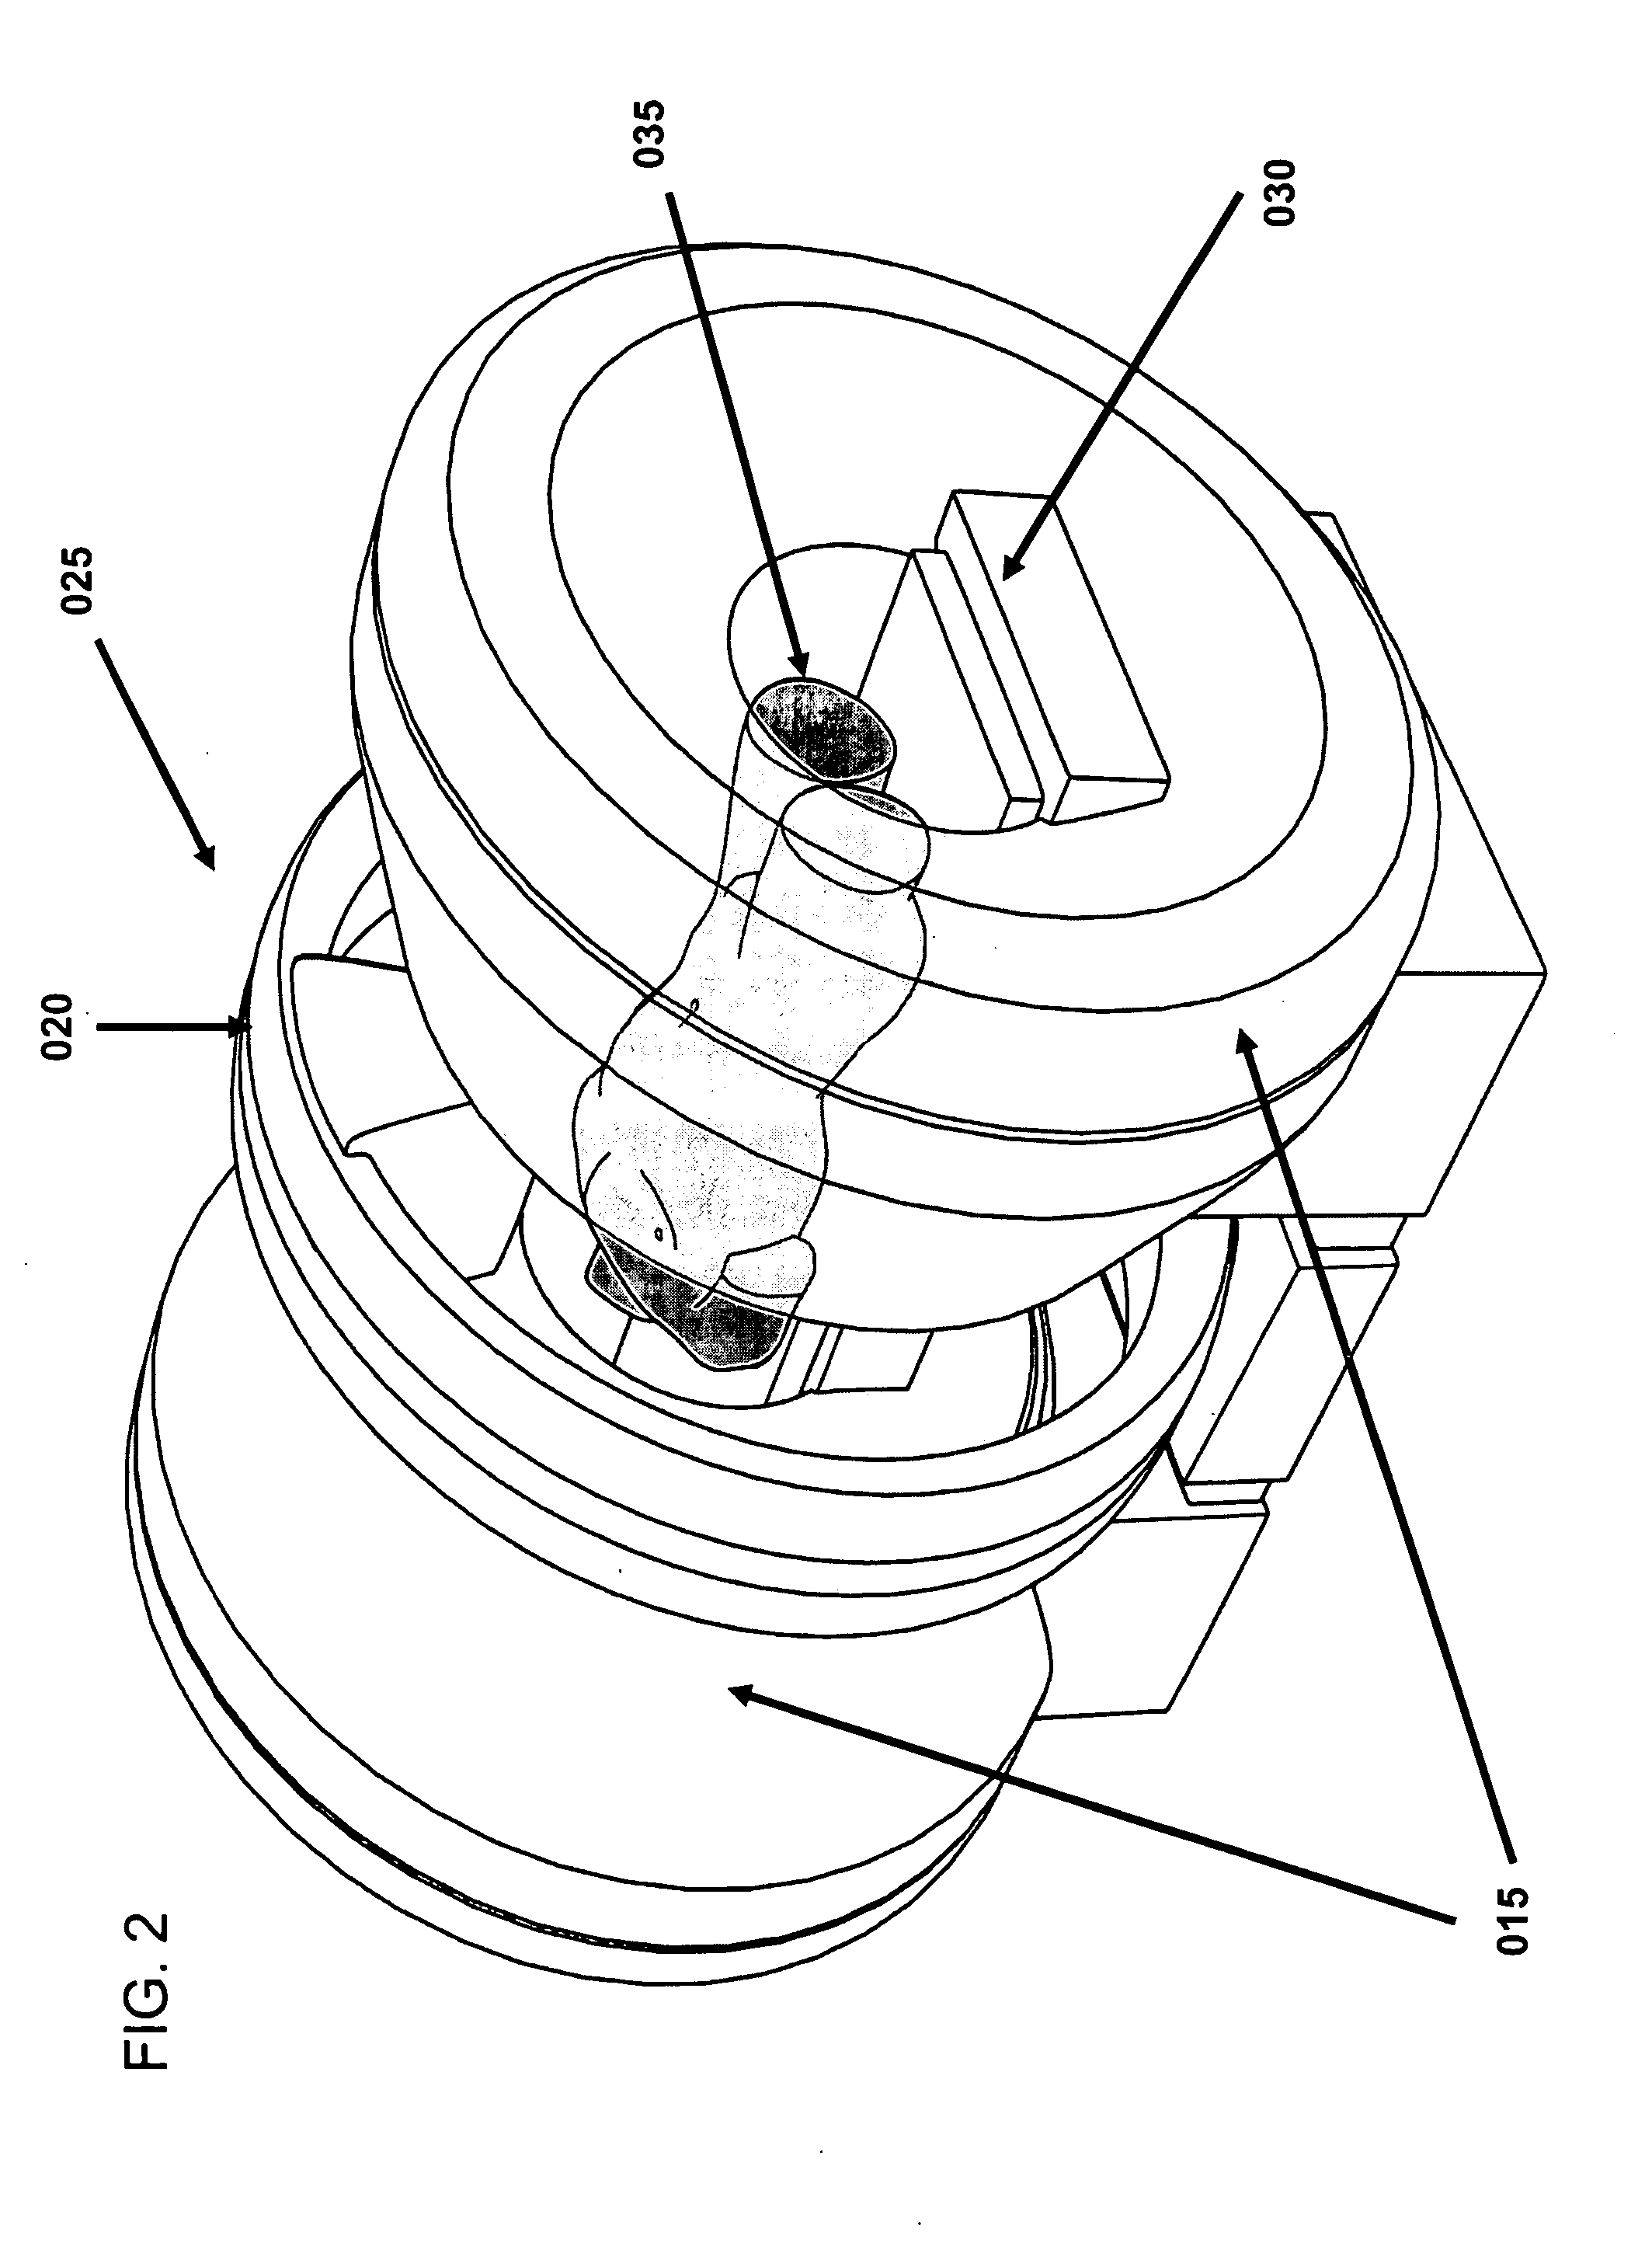 System for delivering conformal radiation therapy while simultaneously imaging soft tissue